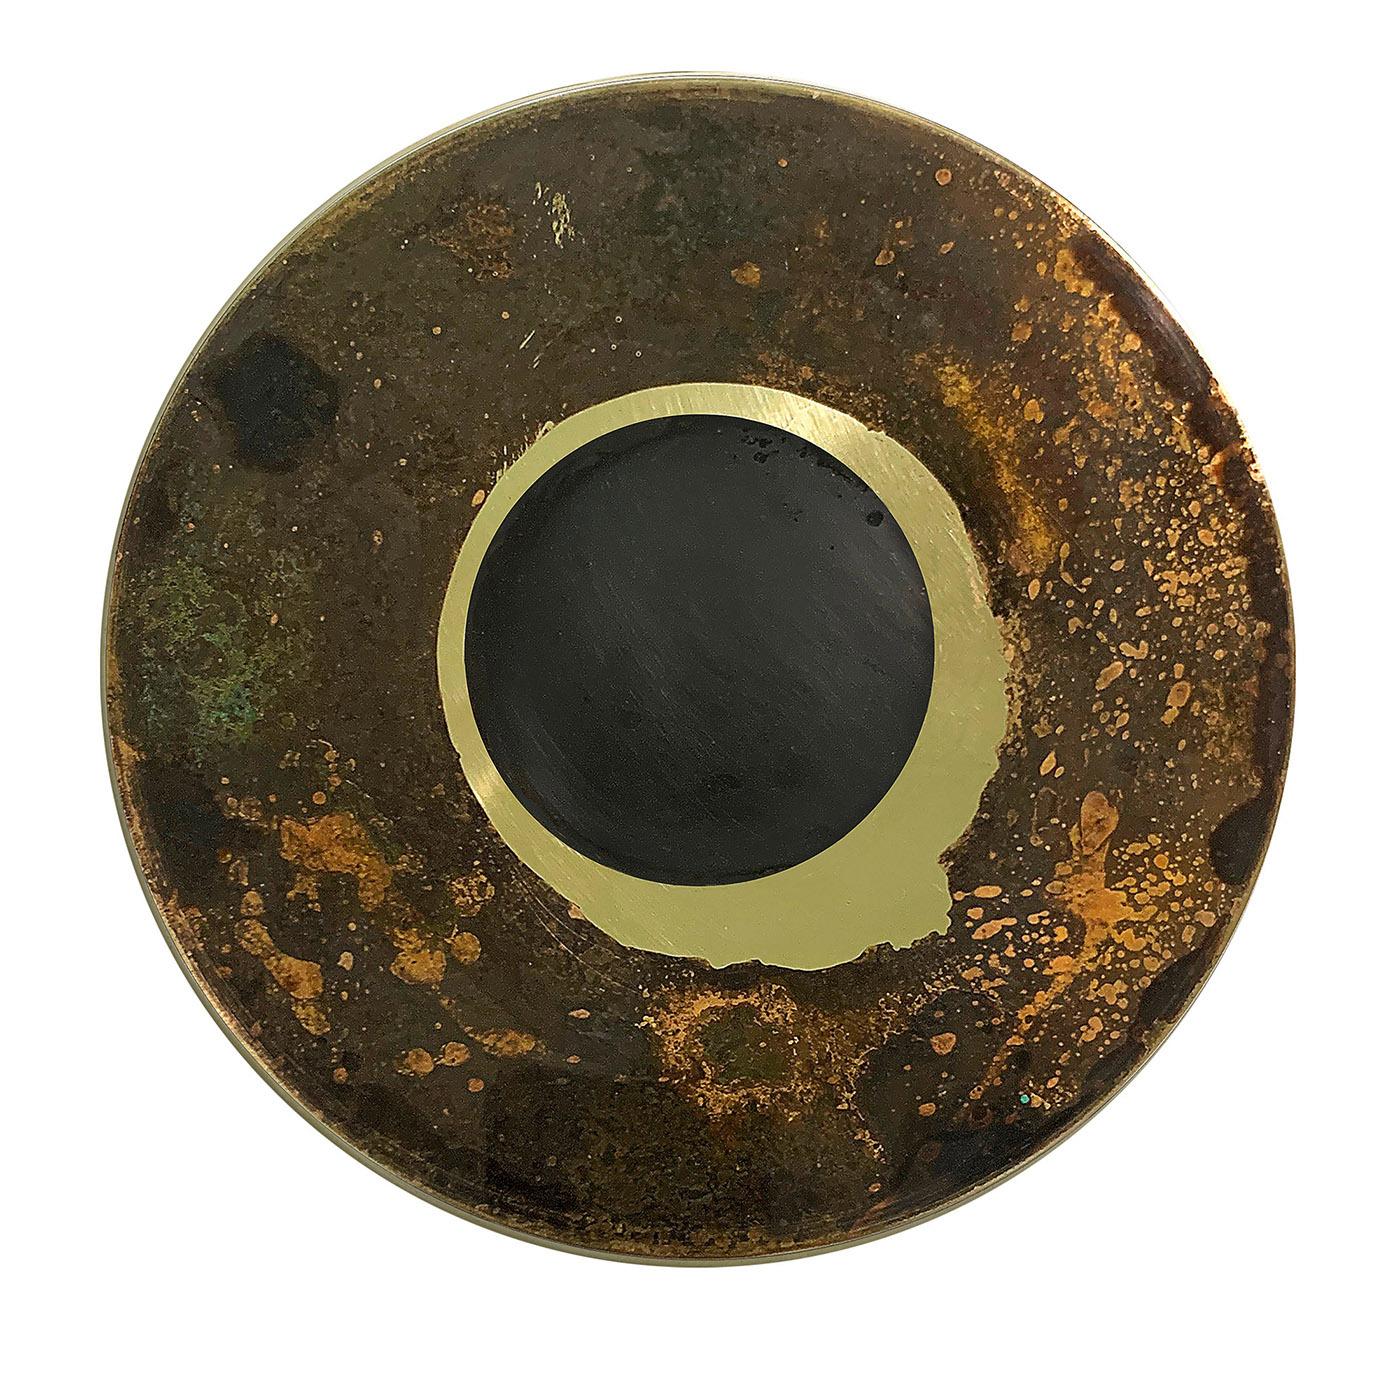 Daring experimentation with acids and oxides on a brass backdrop led to this stylish decorative disk part of the Geografie Emozionali Collection. Golden, green, and dark hues define the traceries sketched out by the chemical reactions applied to the